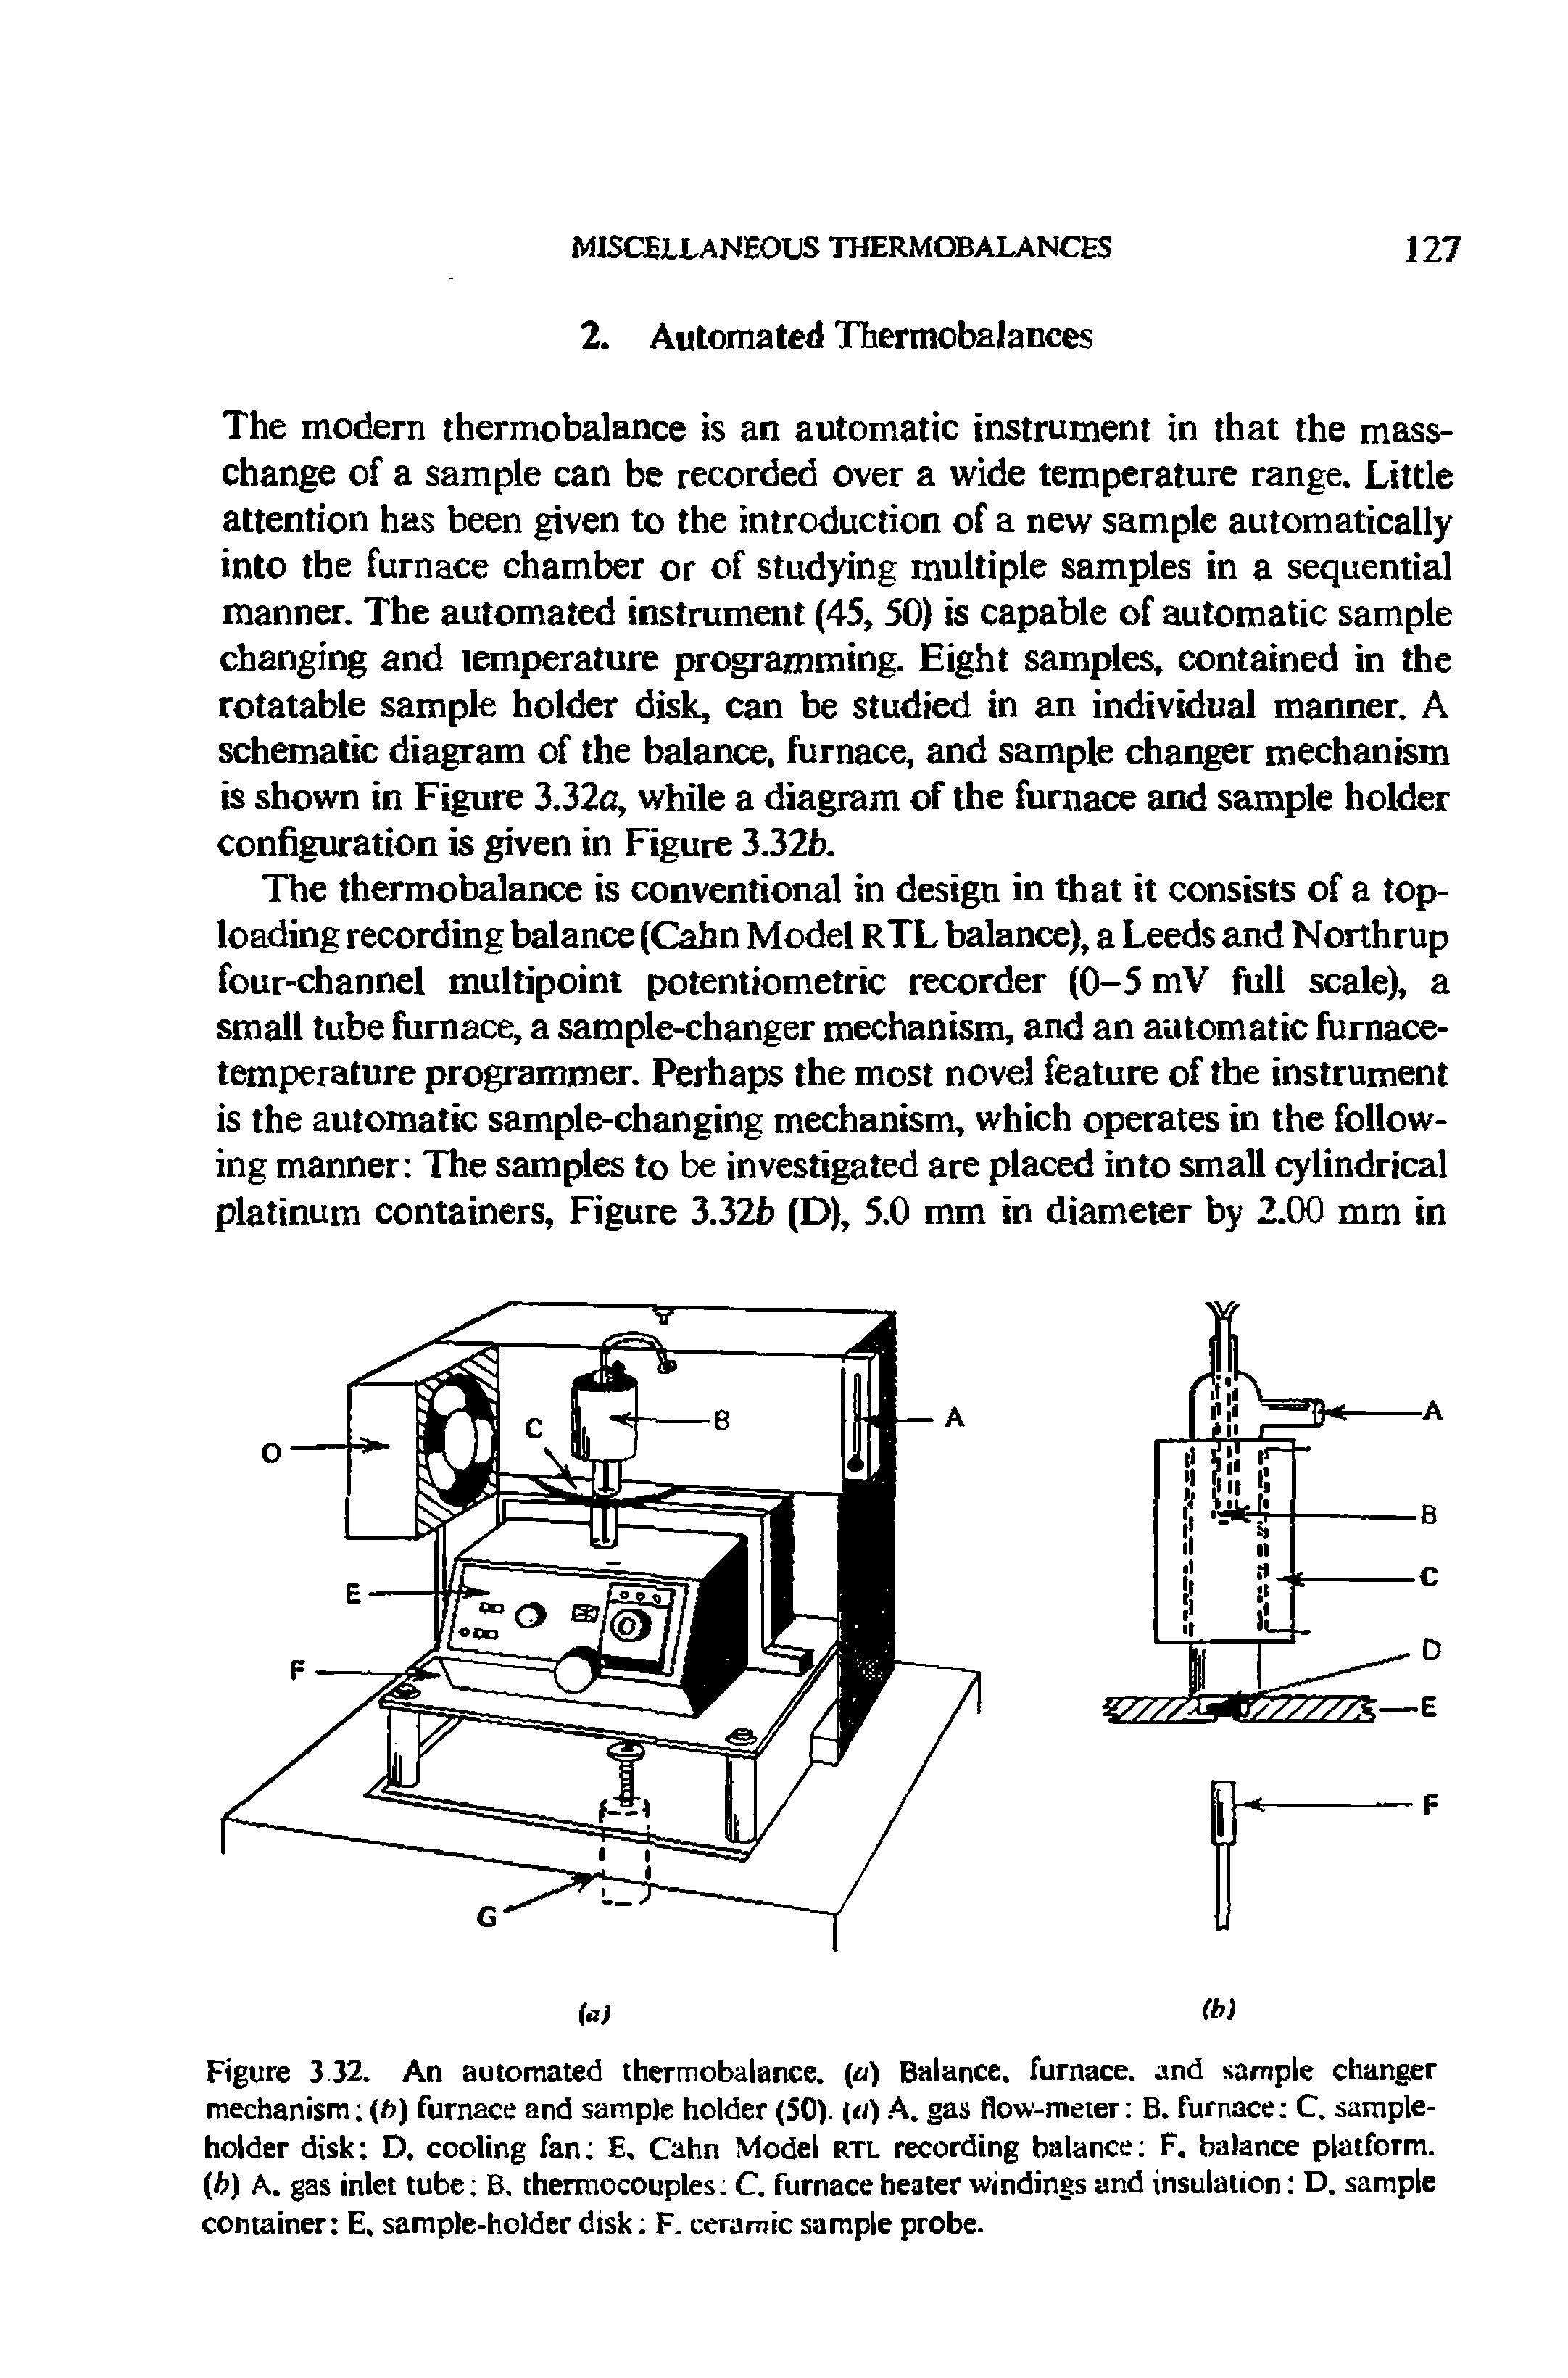 Figure 3.32. An automated thermobalance, (a) Balance, furnace, and sample changer mechanism (ft) furnace and sample holder (50). ( ) A. gas flow-meter B. furnace C. sample-holder disk D. cooling fan E, Cahn Model rtl recording balance F. balance platform, (ft) A. gas inlet tube B, thermocouples C. furnace heater windings and insulation D. sample container E. sample-holder disk F. ceramic sample probe.